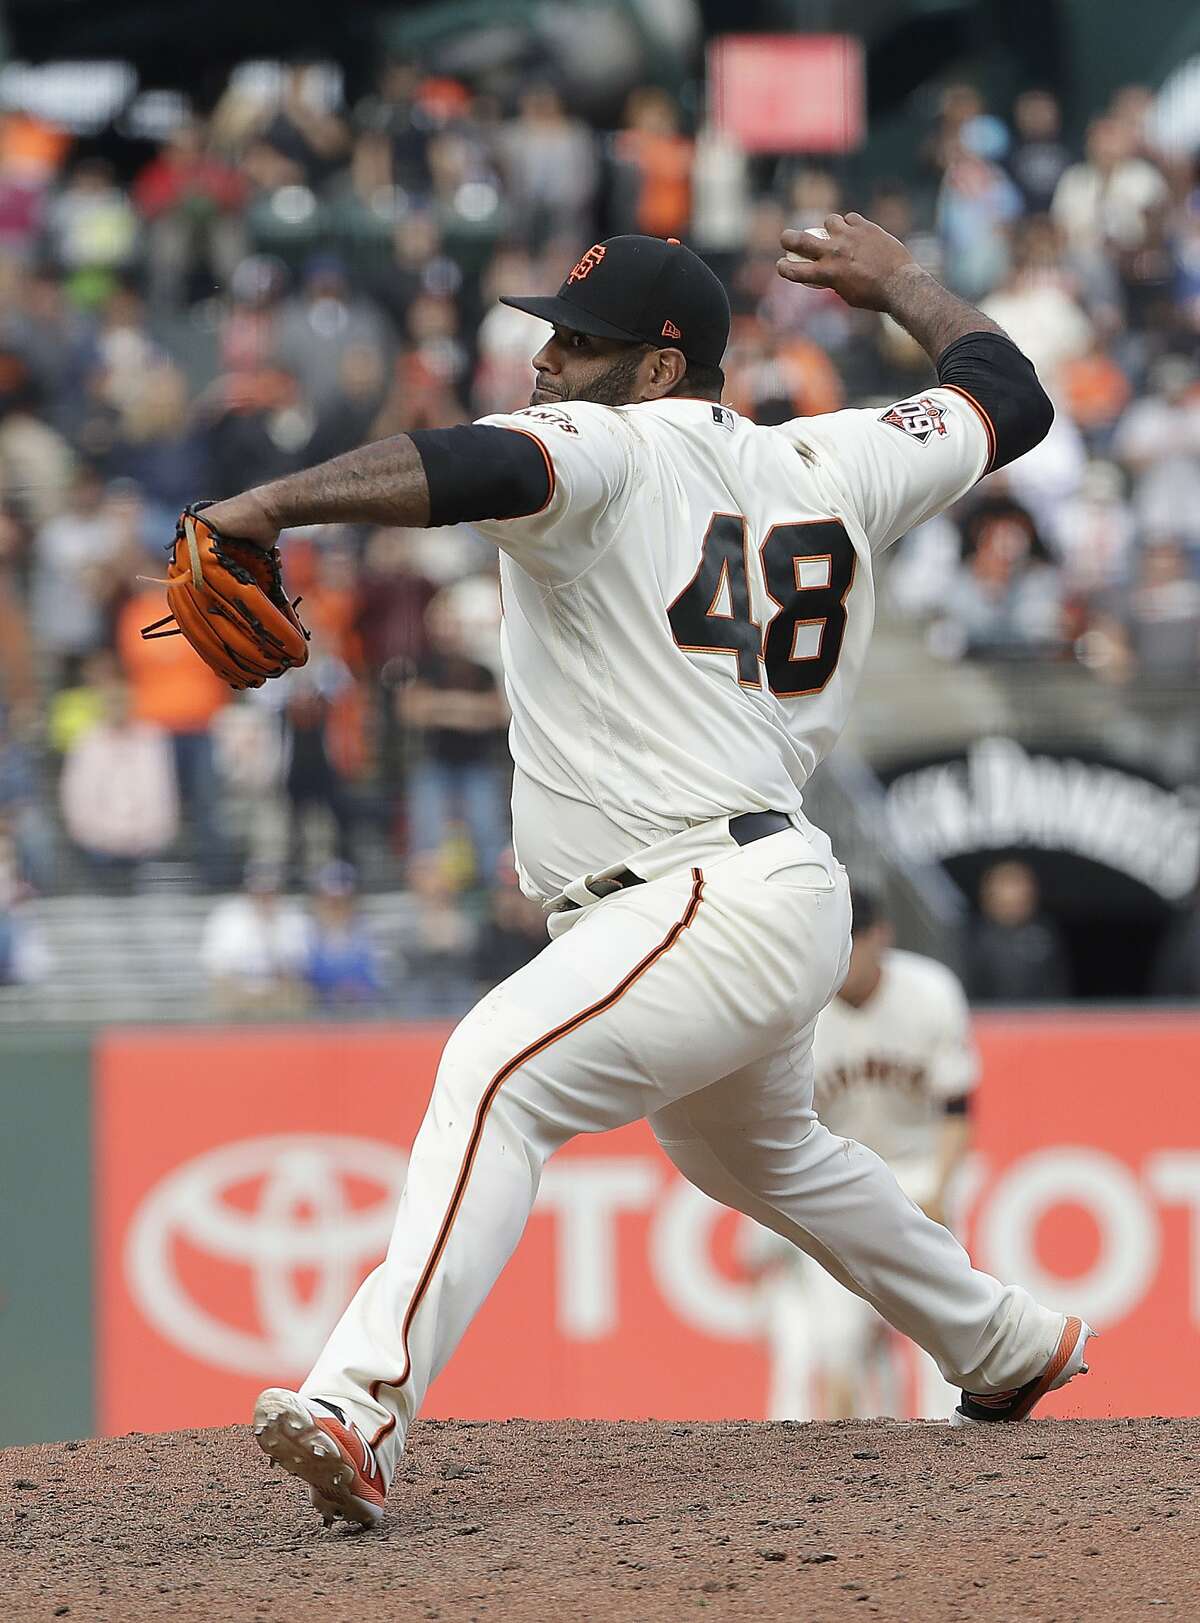 San Francisco Giants' Pablo Sandoval pitches against the Los Angeles Dodgers during the ninth inning of a baseball game in San Francisco, Saturday, April 28, 2018. (AP Photo/Jeff Chiu)